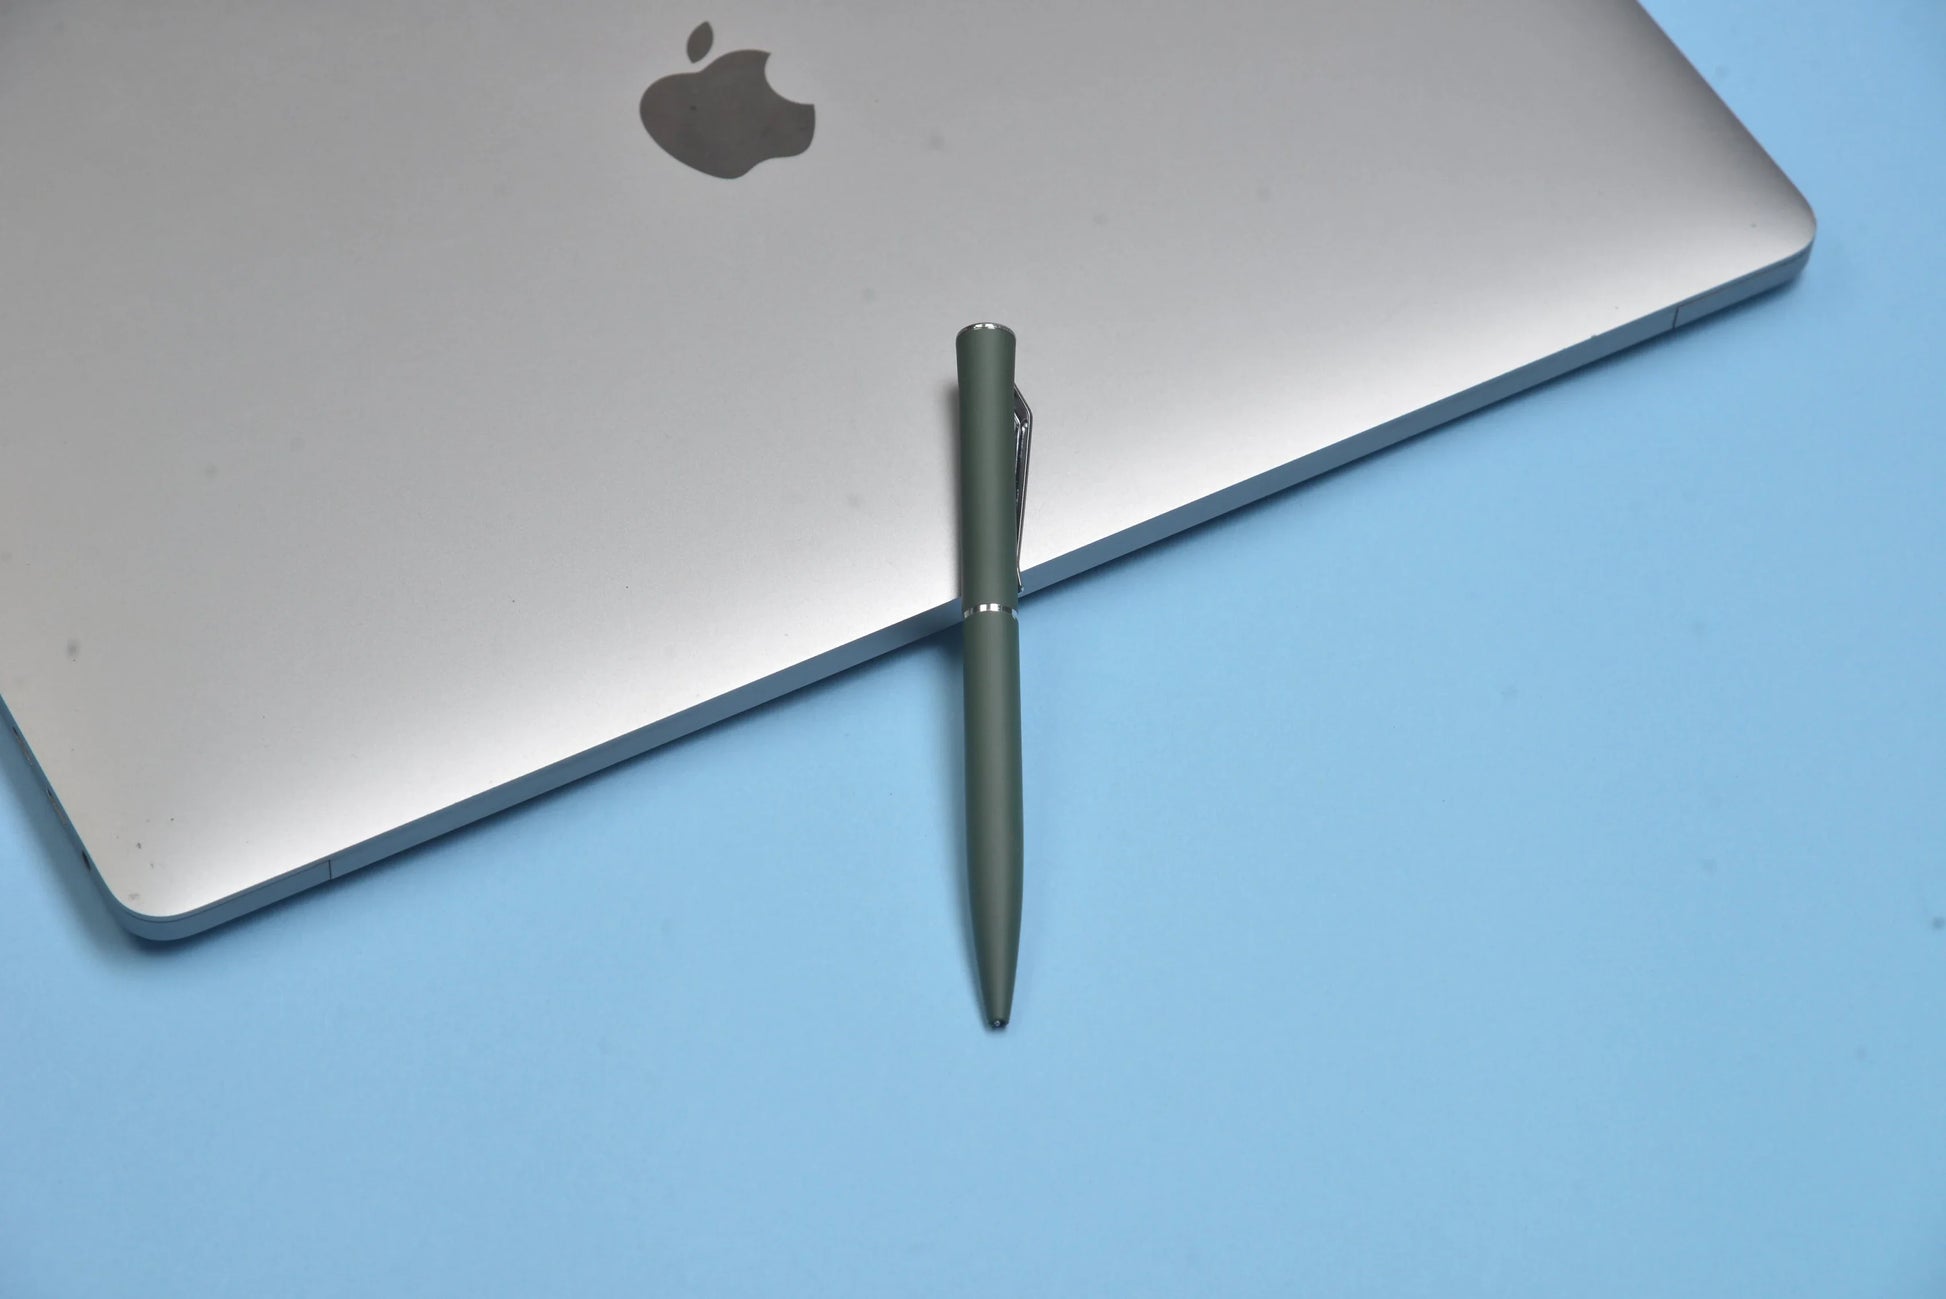 Whether you're signing important documents or jotting down notes, our pen is the perfect writing tool. The smooth ink flow and comfortable grip make it a joy to write with, while the sleek design makes it a stylish accessory.